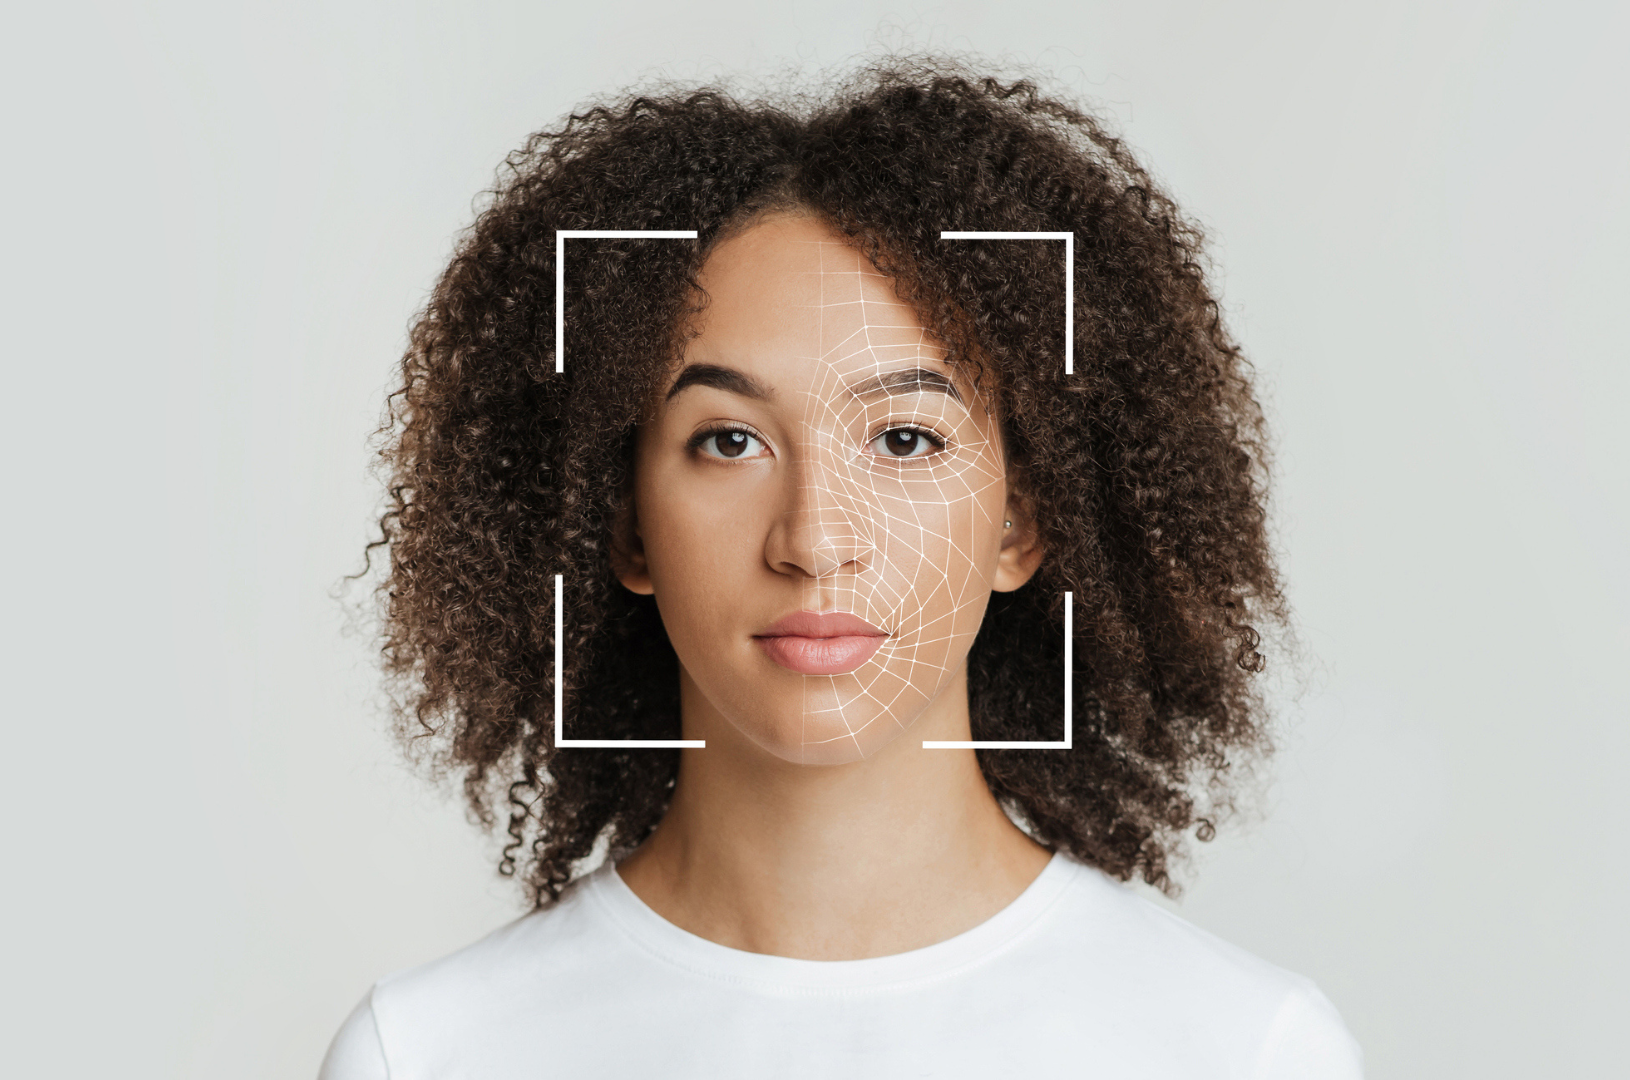 Best Facial Recognition Software to Use in 2023